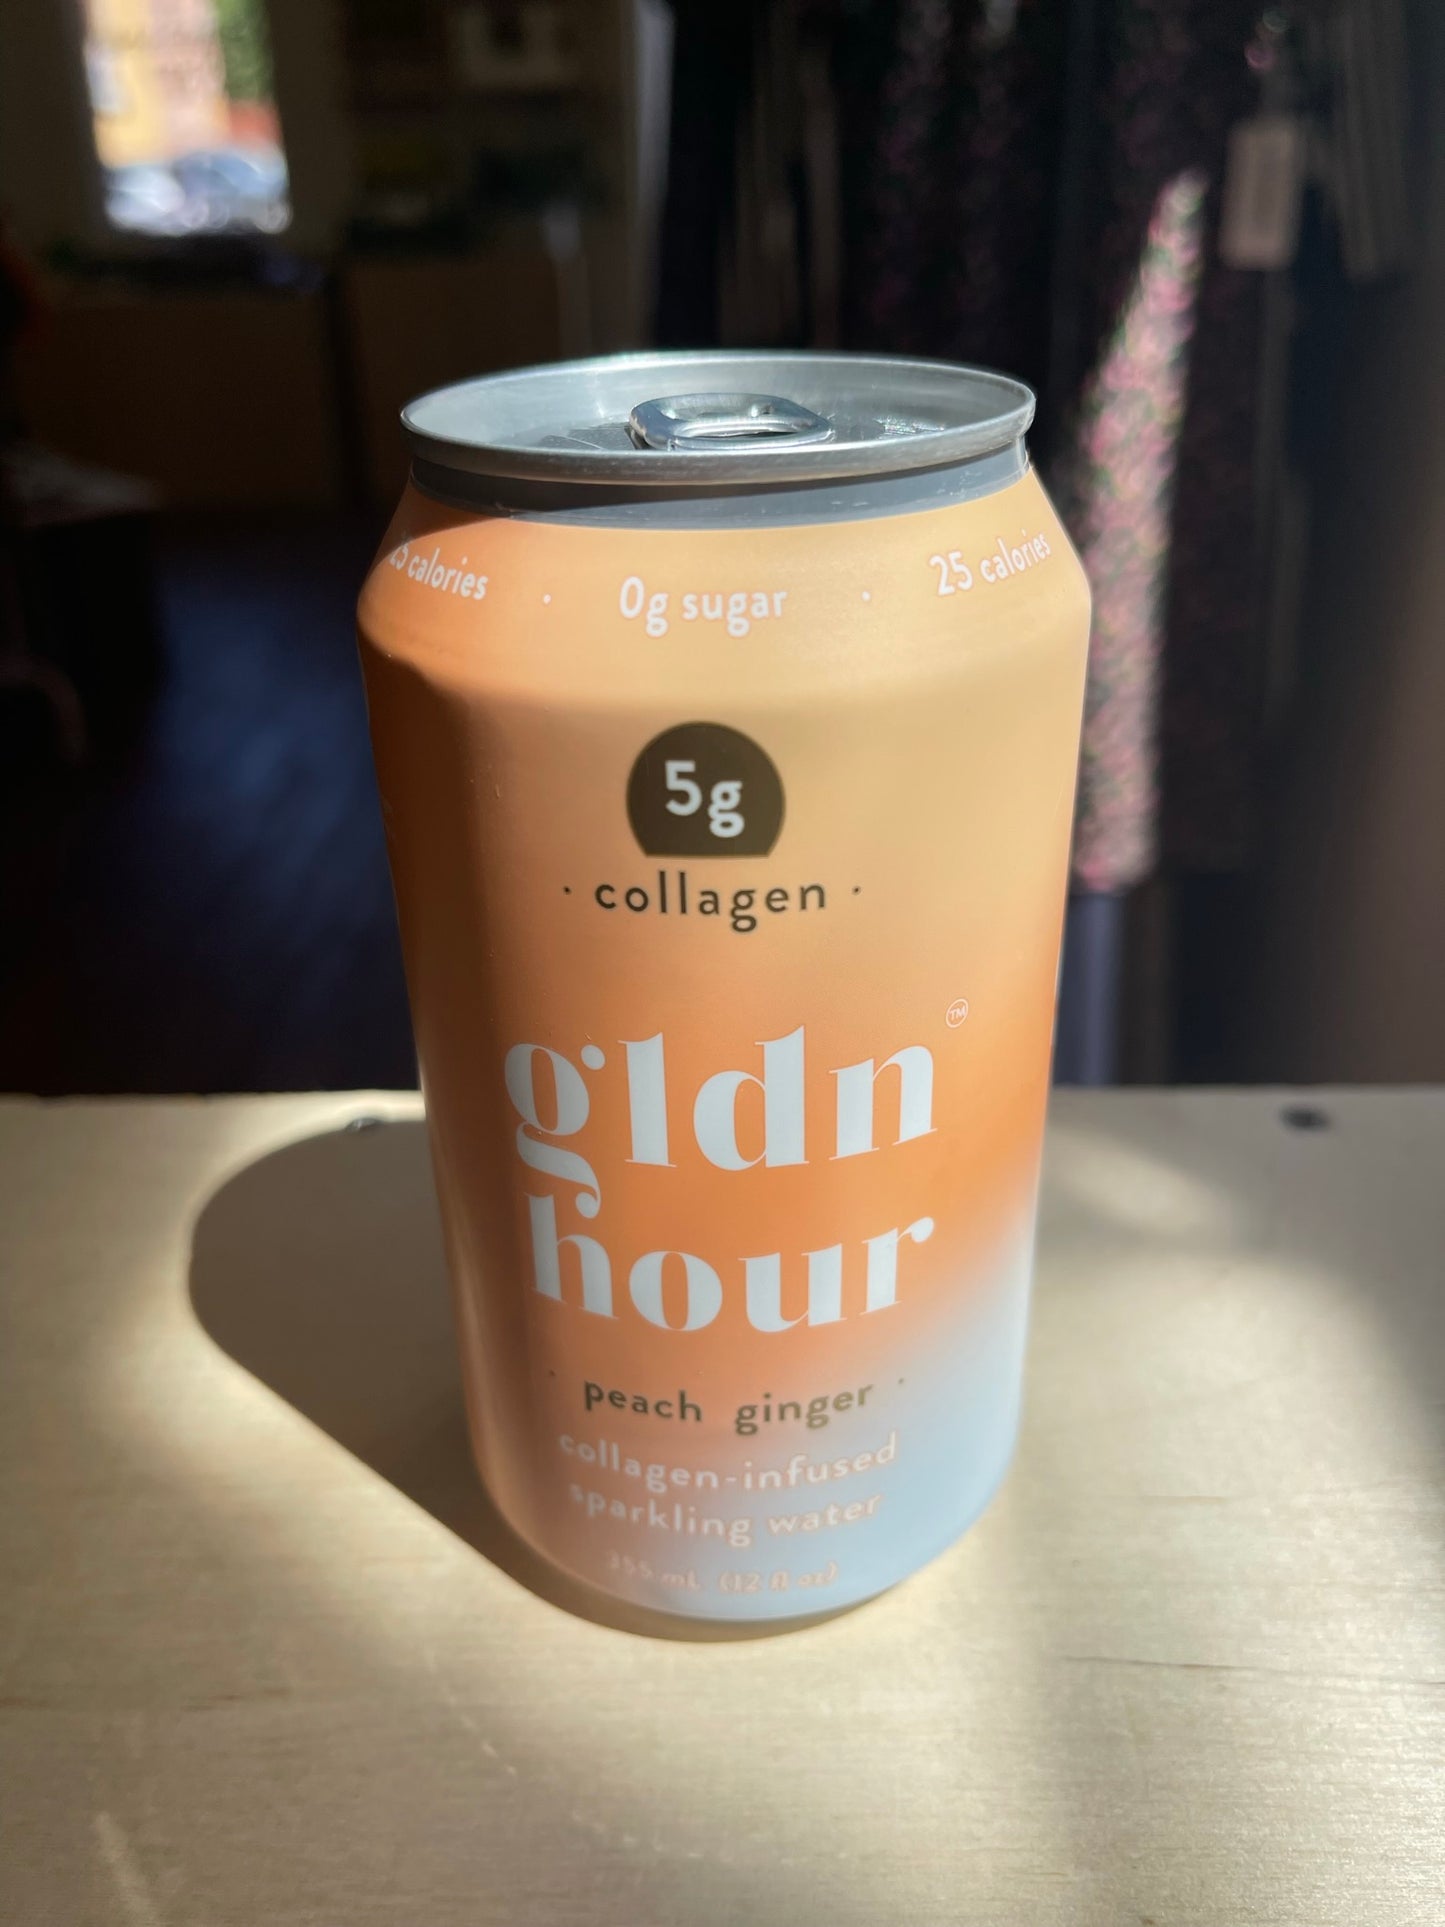 GLDN HOUR collagen-infused sparkling water